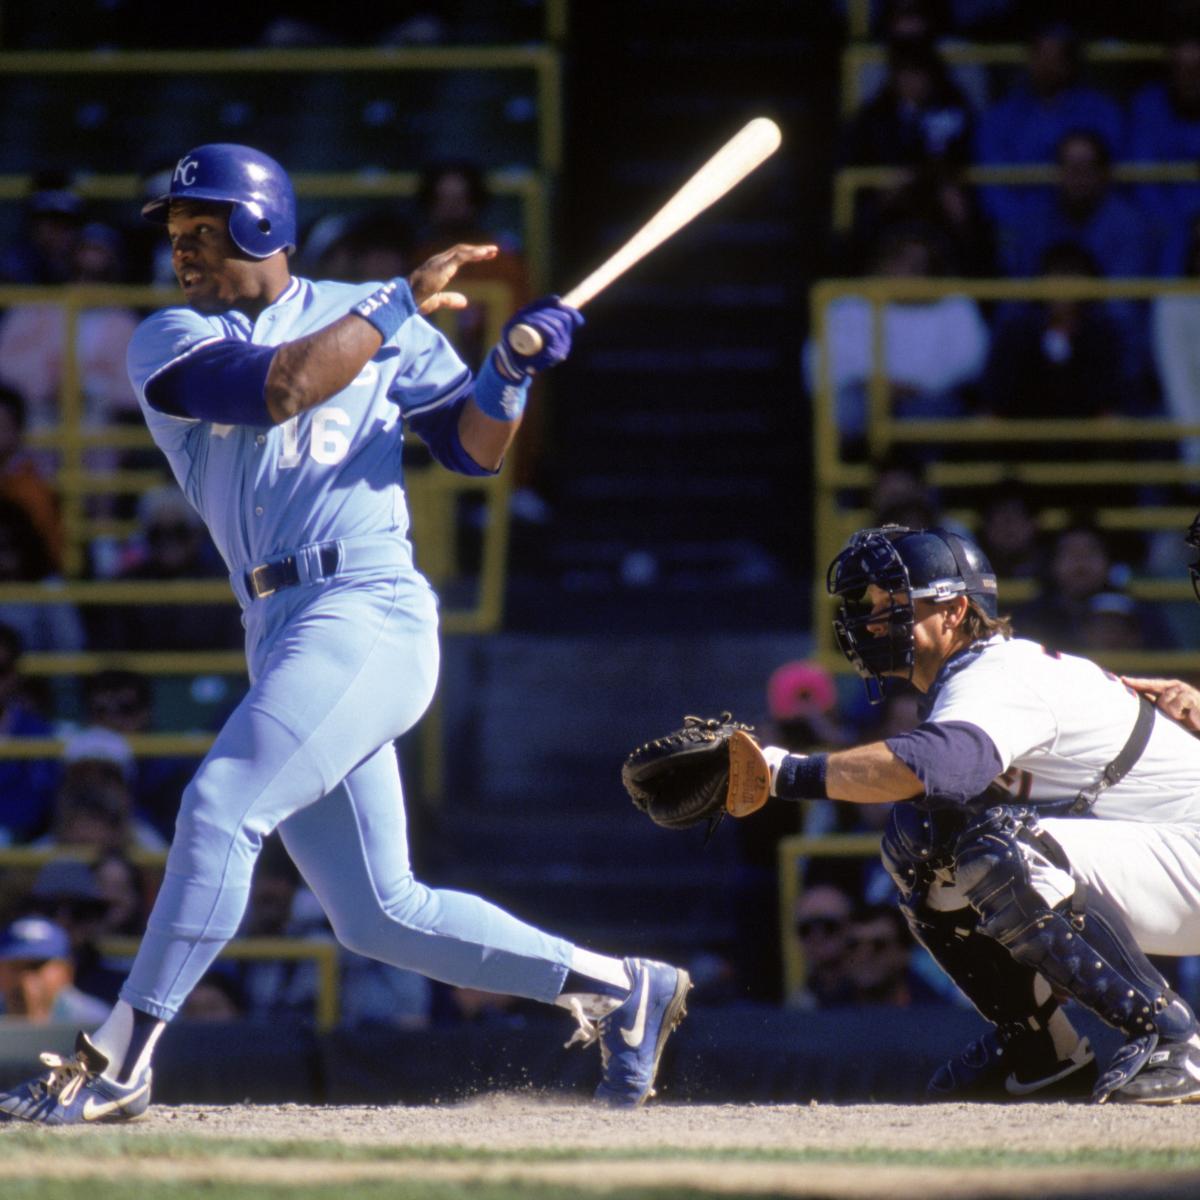 Bo Jackson's Baseball Career Could Have Been Hall of Fame-Worthy